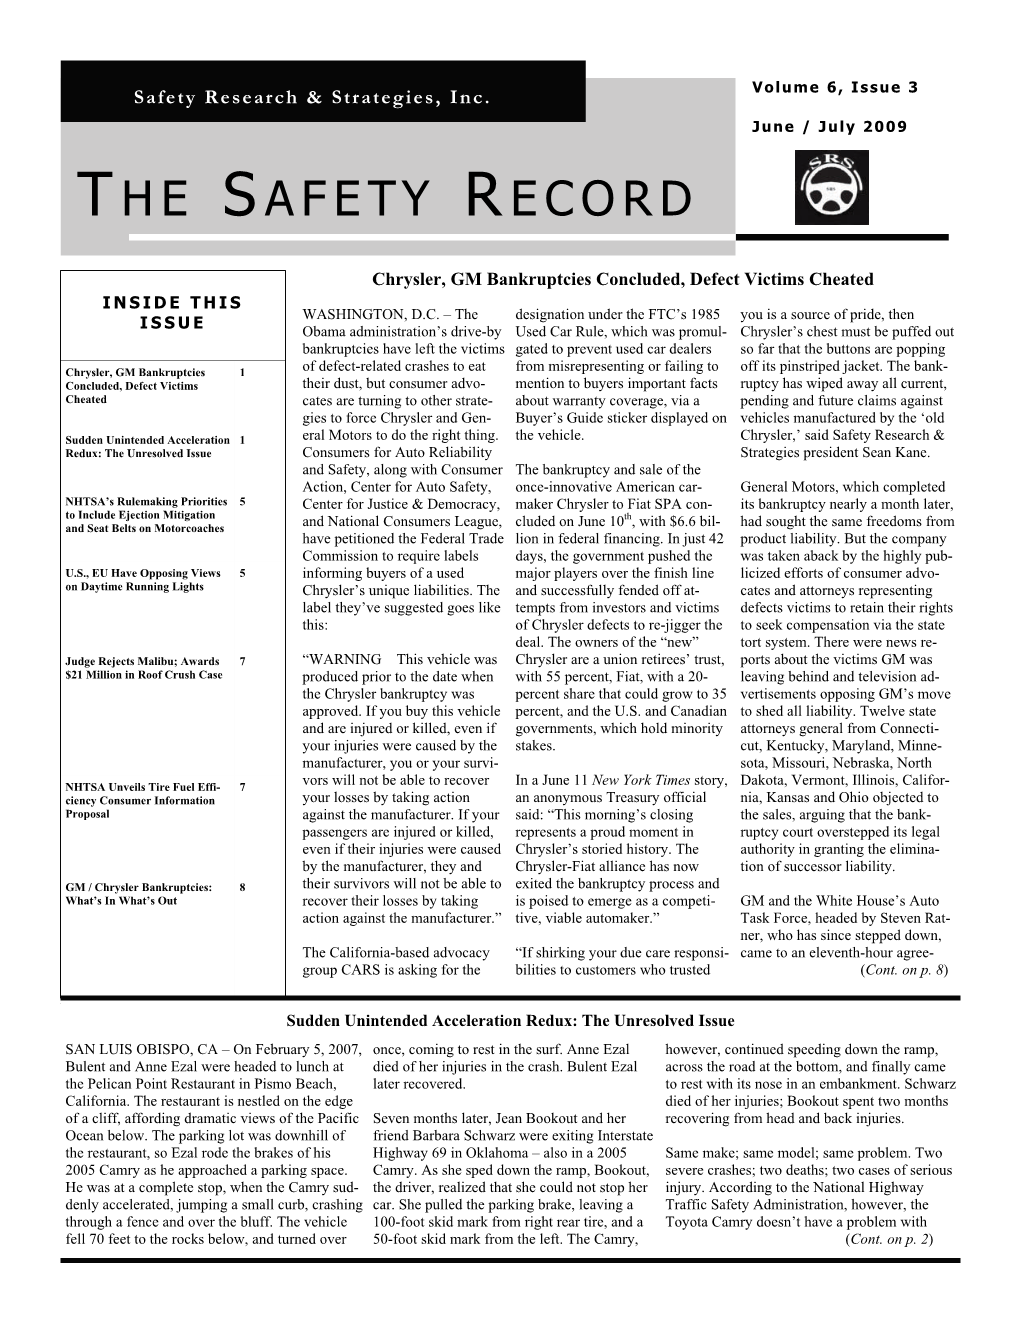 The Safety Record Page 3 Sudden Unintended Acceleration Redux: the Unresolved Issue (Cont